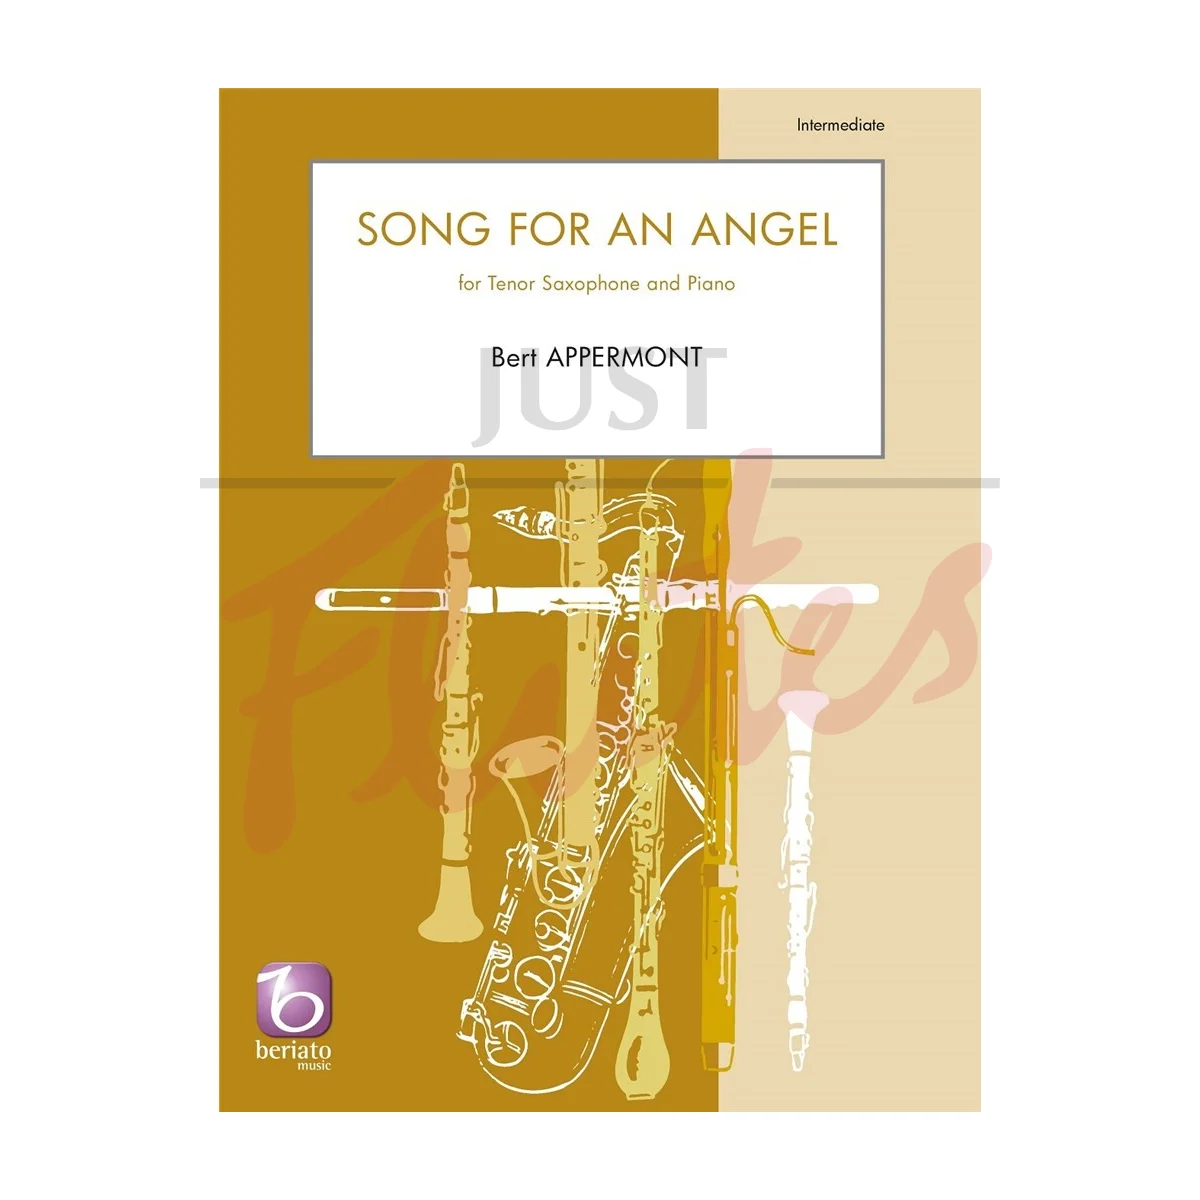 Song for an Angel for Tenor Saxophone and Piano